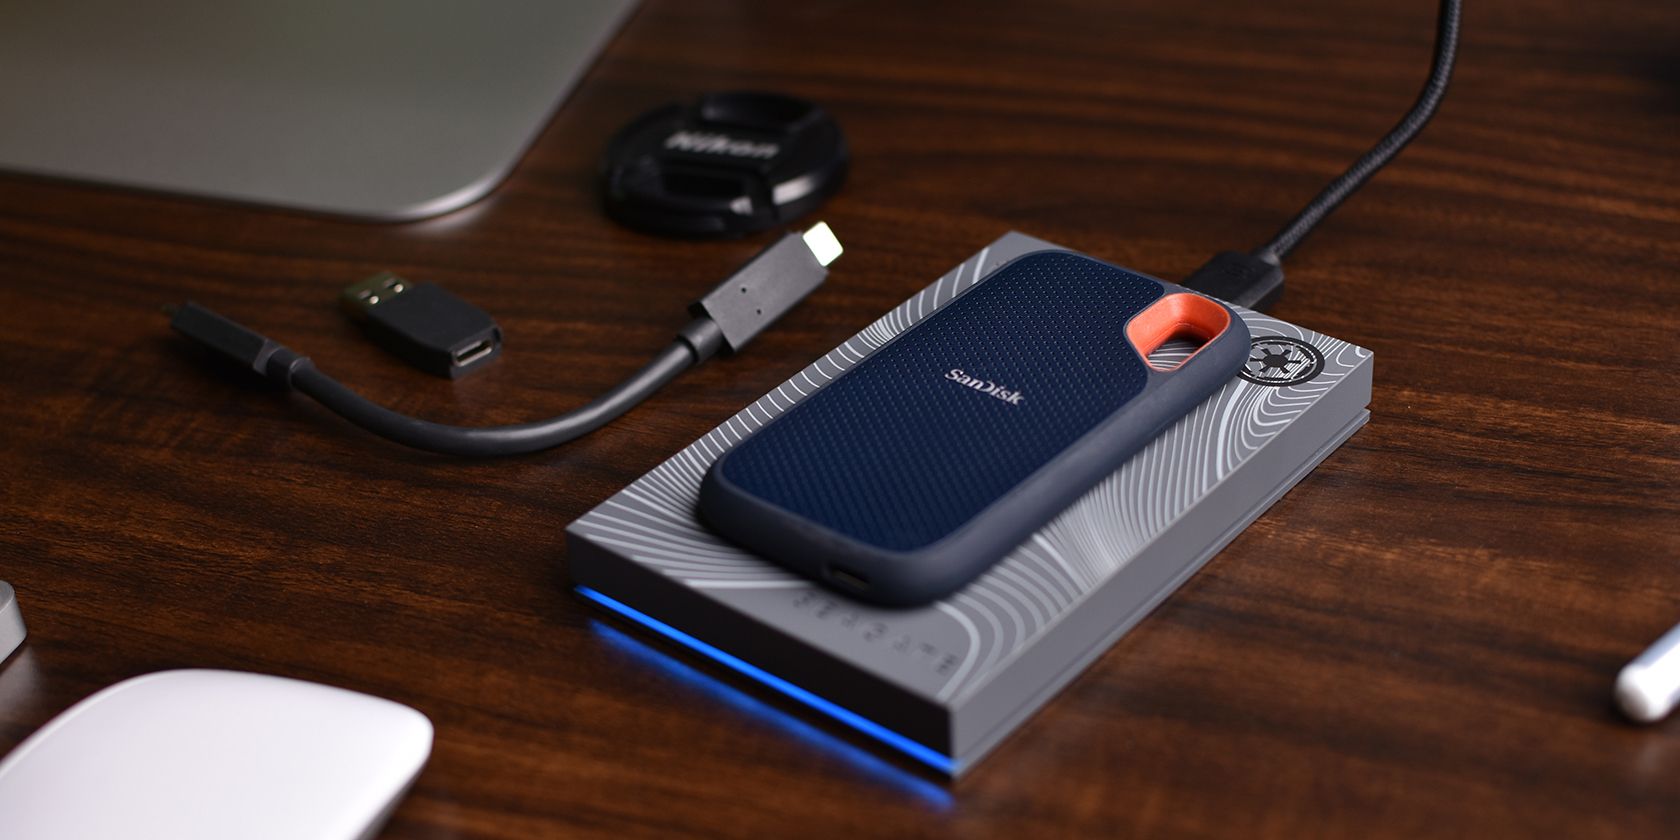 External Disk on Table